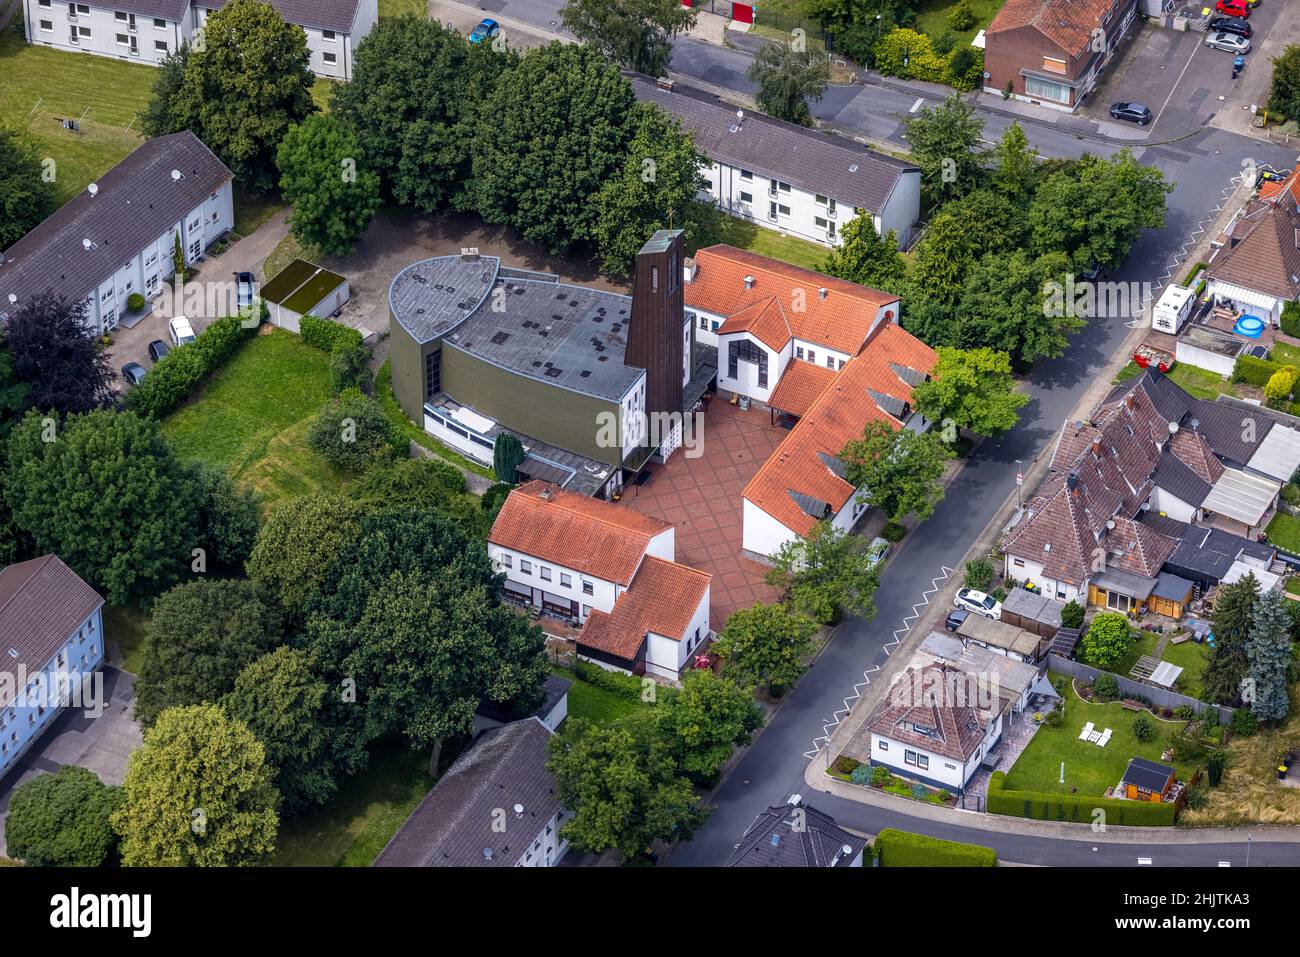 Aerial view, Coptic Orthodox Patriarchate Church of St. Mary and St. Philopater Mercurius, Massen, Unna, Ruhr Area, North Rhine-Westphalia, Germany, p Stock Photo